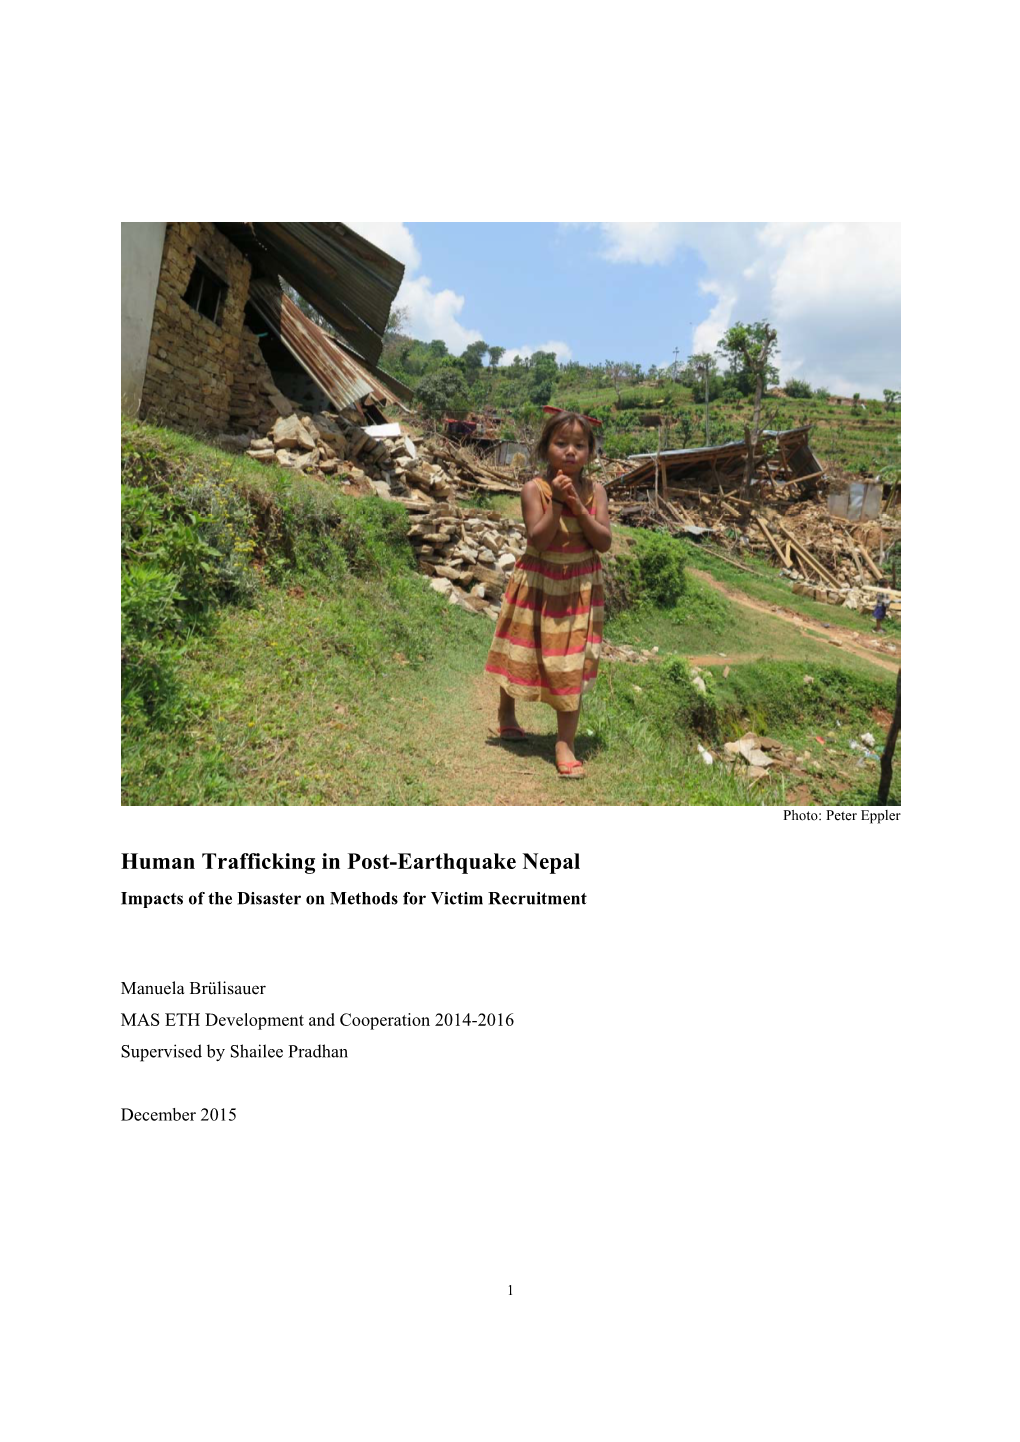 Human Trafficking in Post-Earthquake Nepal Impacts of the Disaster on Methods for Victim Recruitment